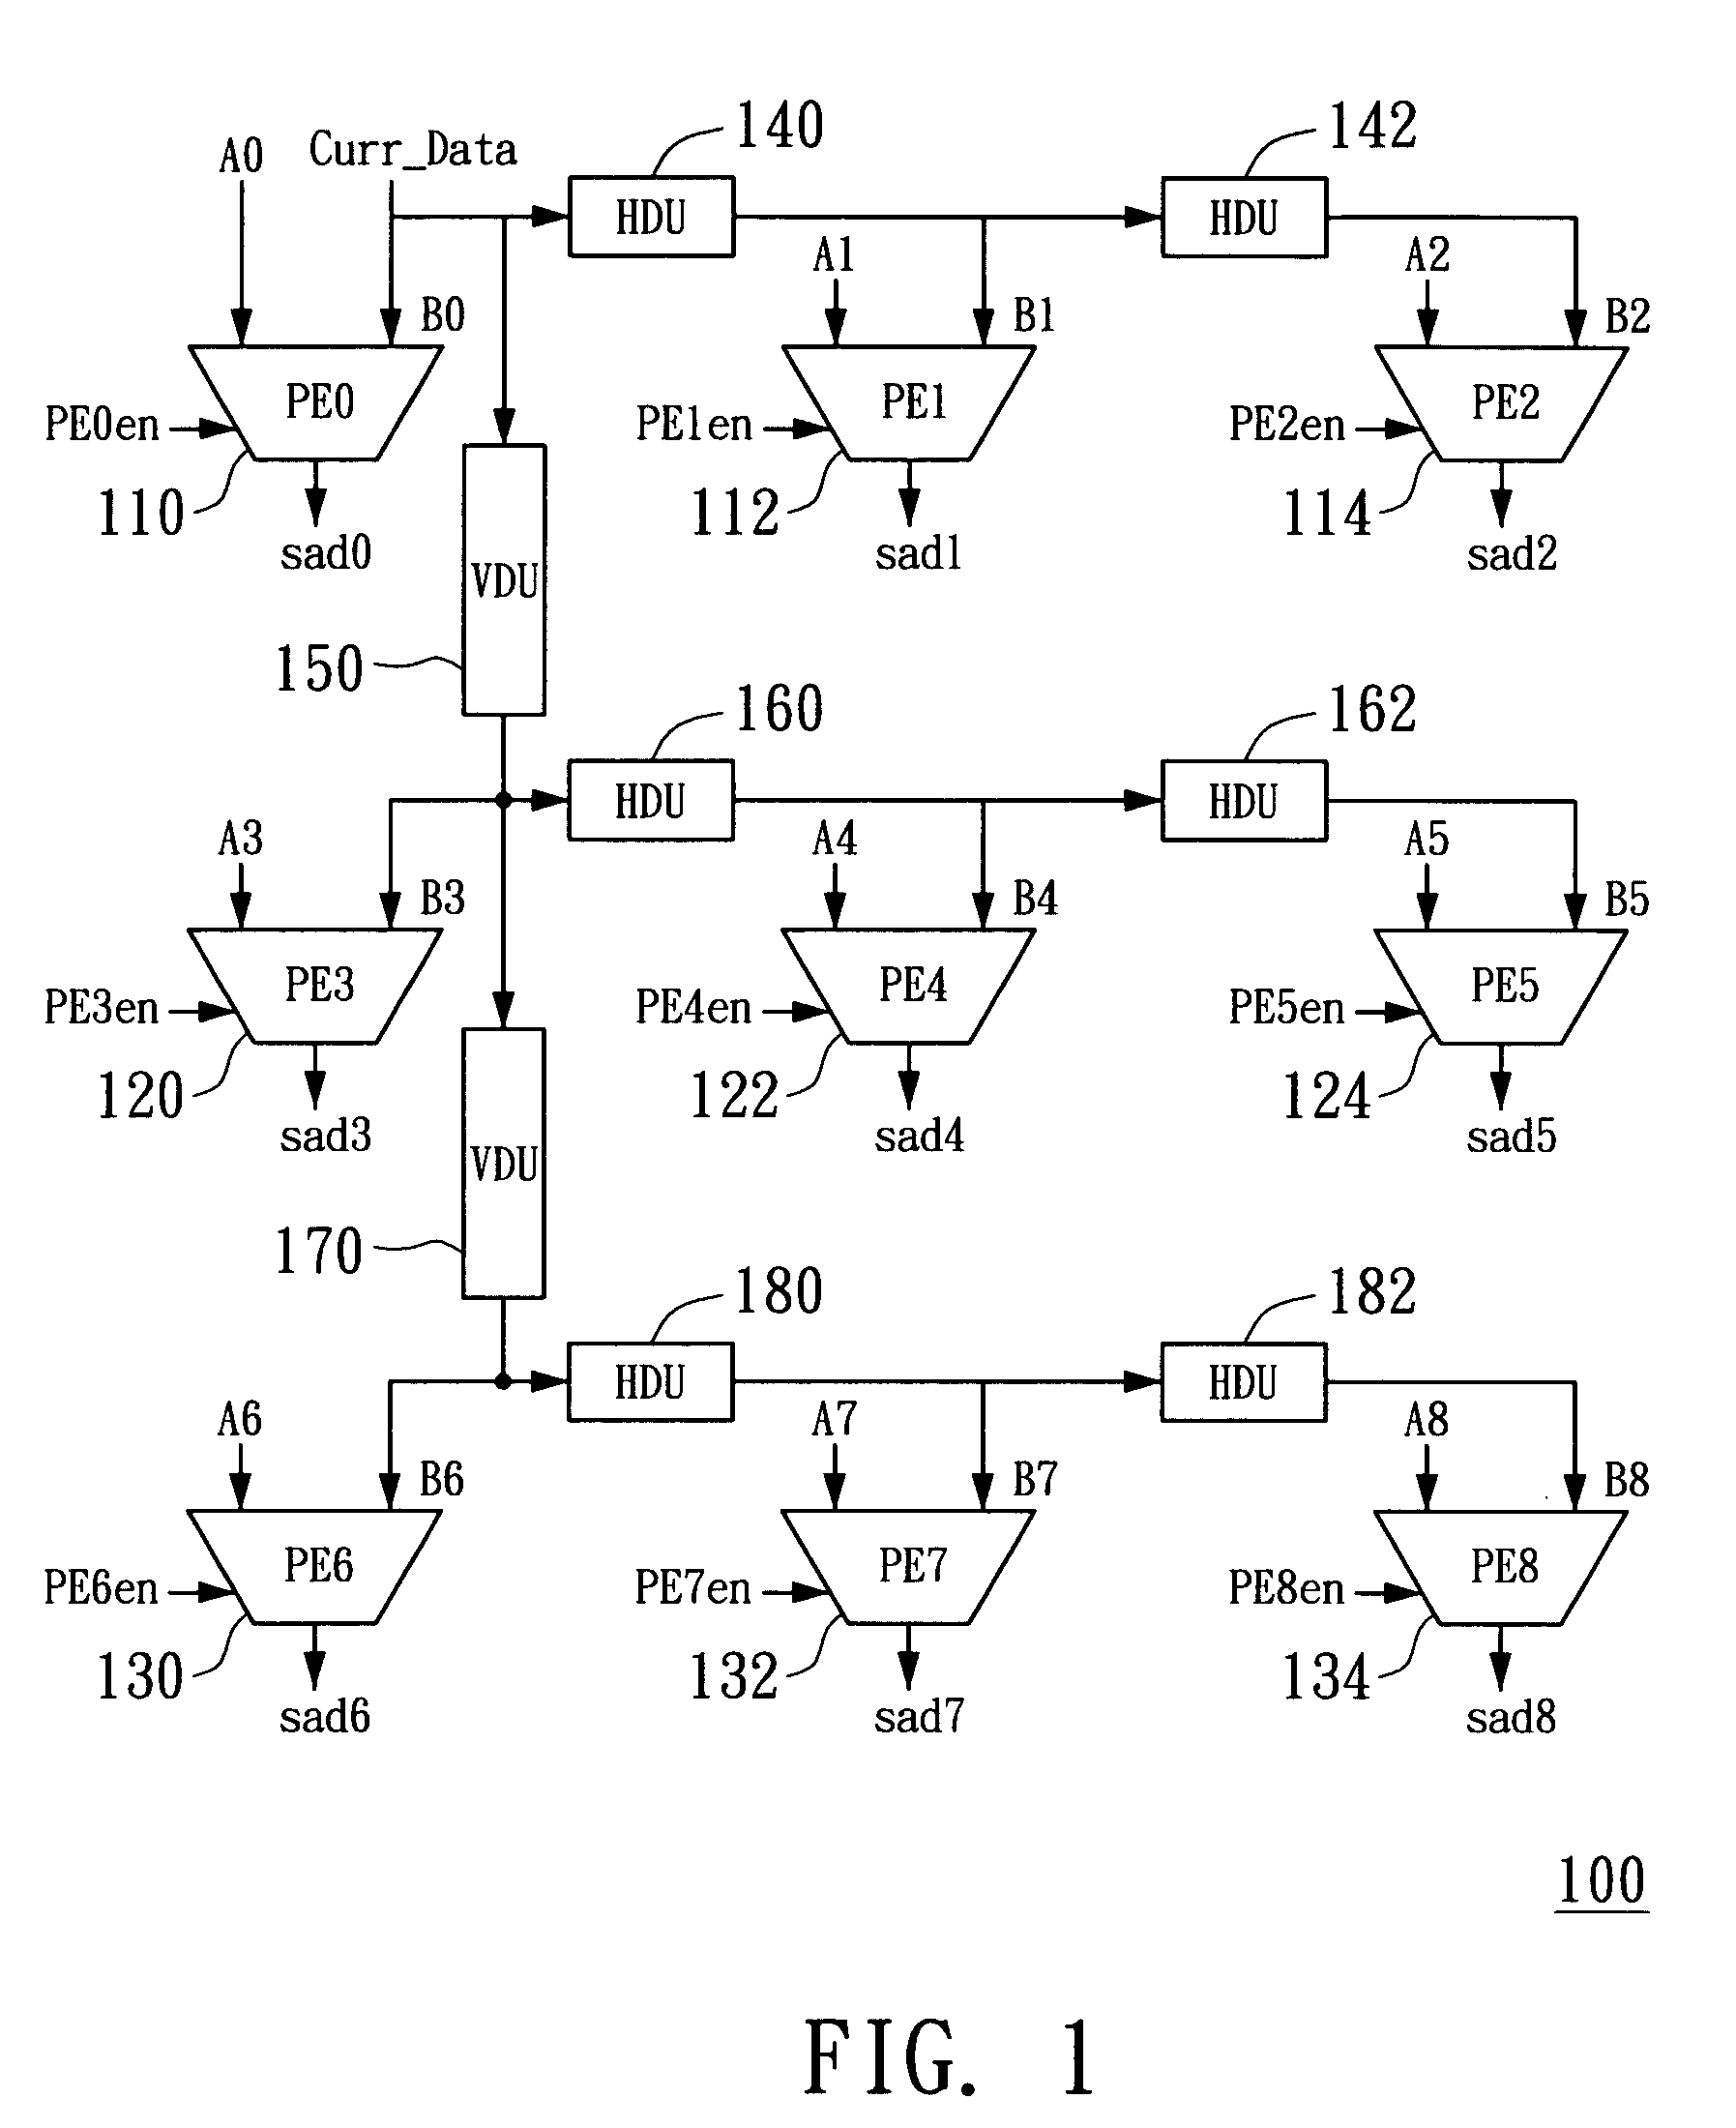 Apparatus for motion estimation using a two-dimensional processing element array and method therefor